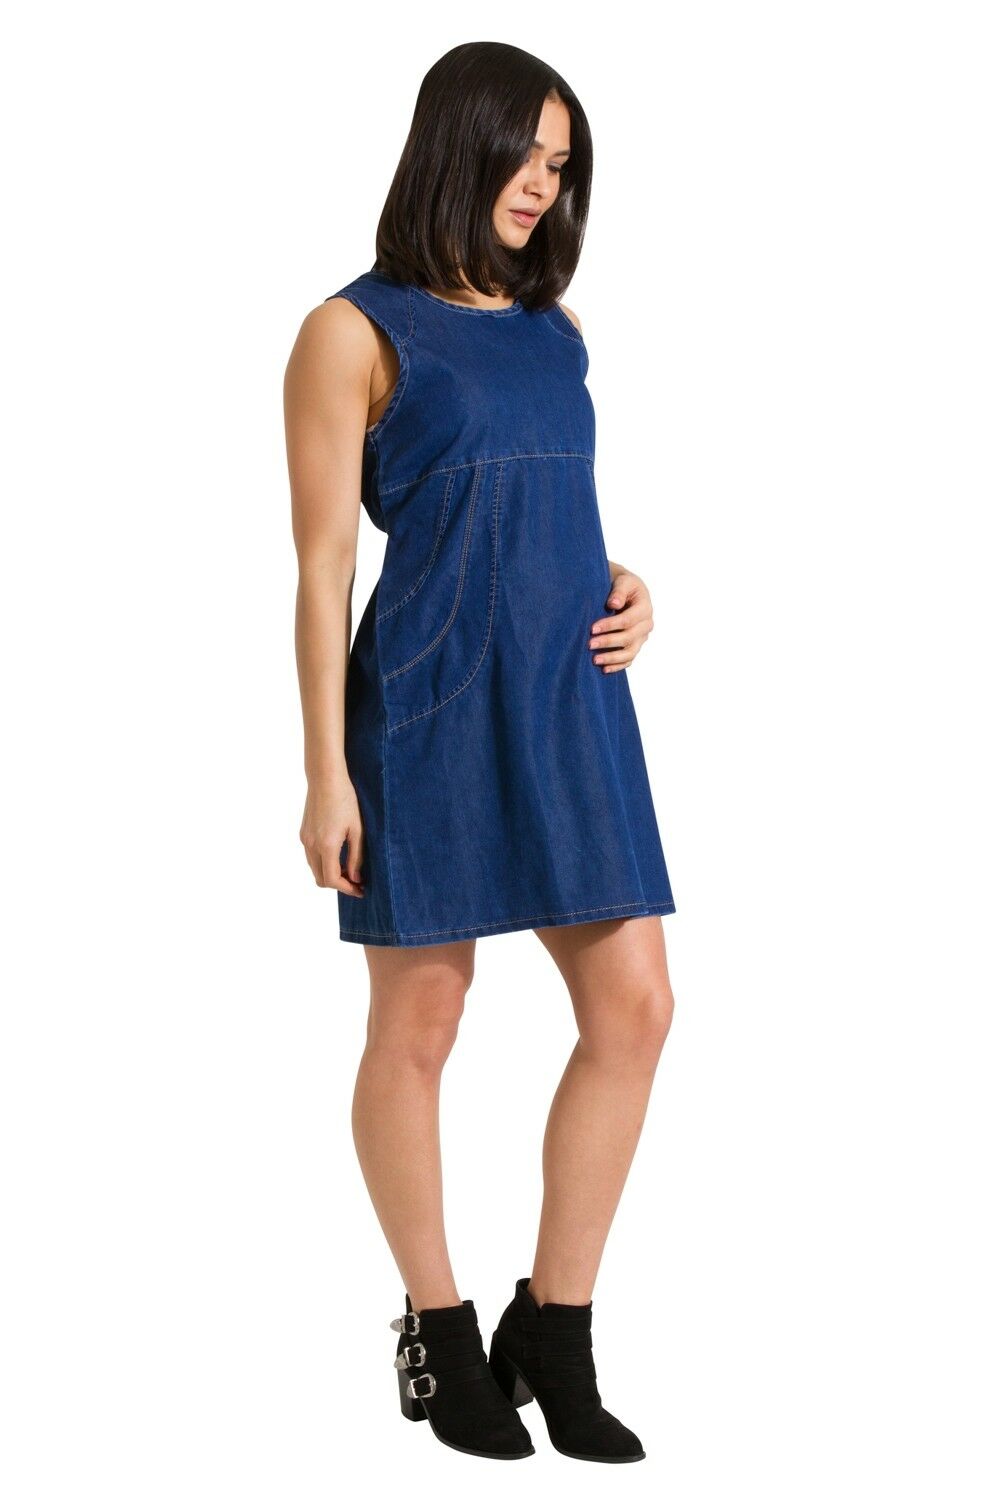 Full-length front view of Thelma soft denim blue pinafore maternity dress.